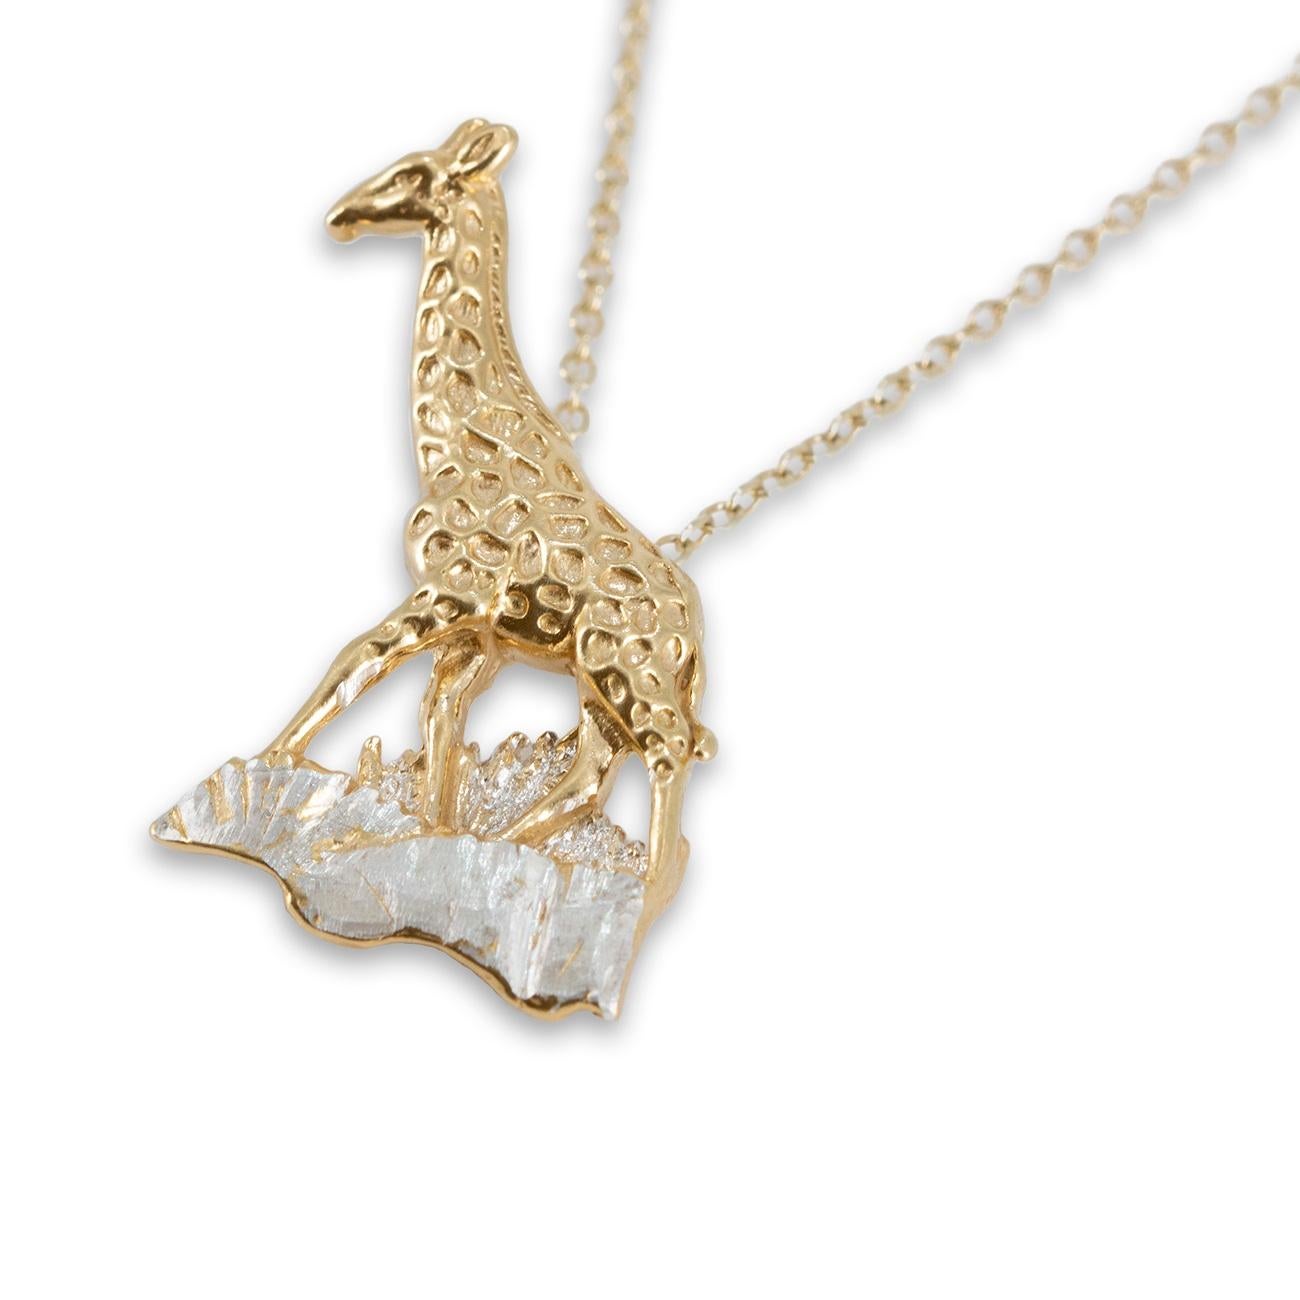 Giraffe Pendant in 18 carat Gold on Sterling Silver In New Condition For Sale In London, GB